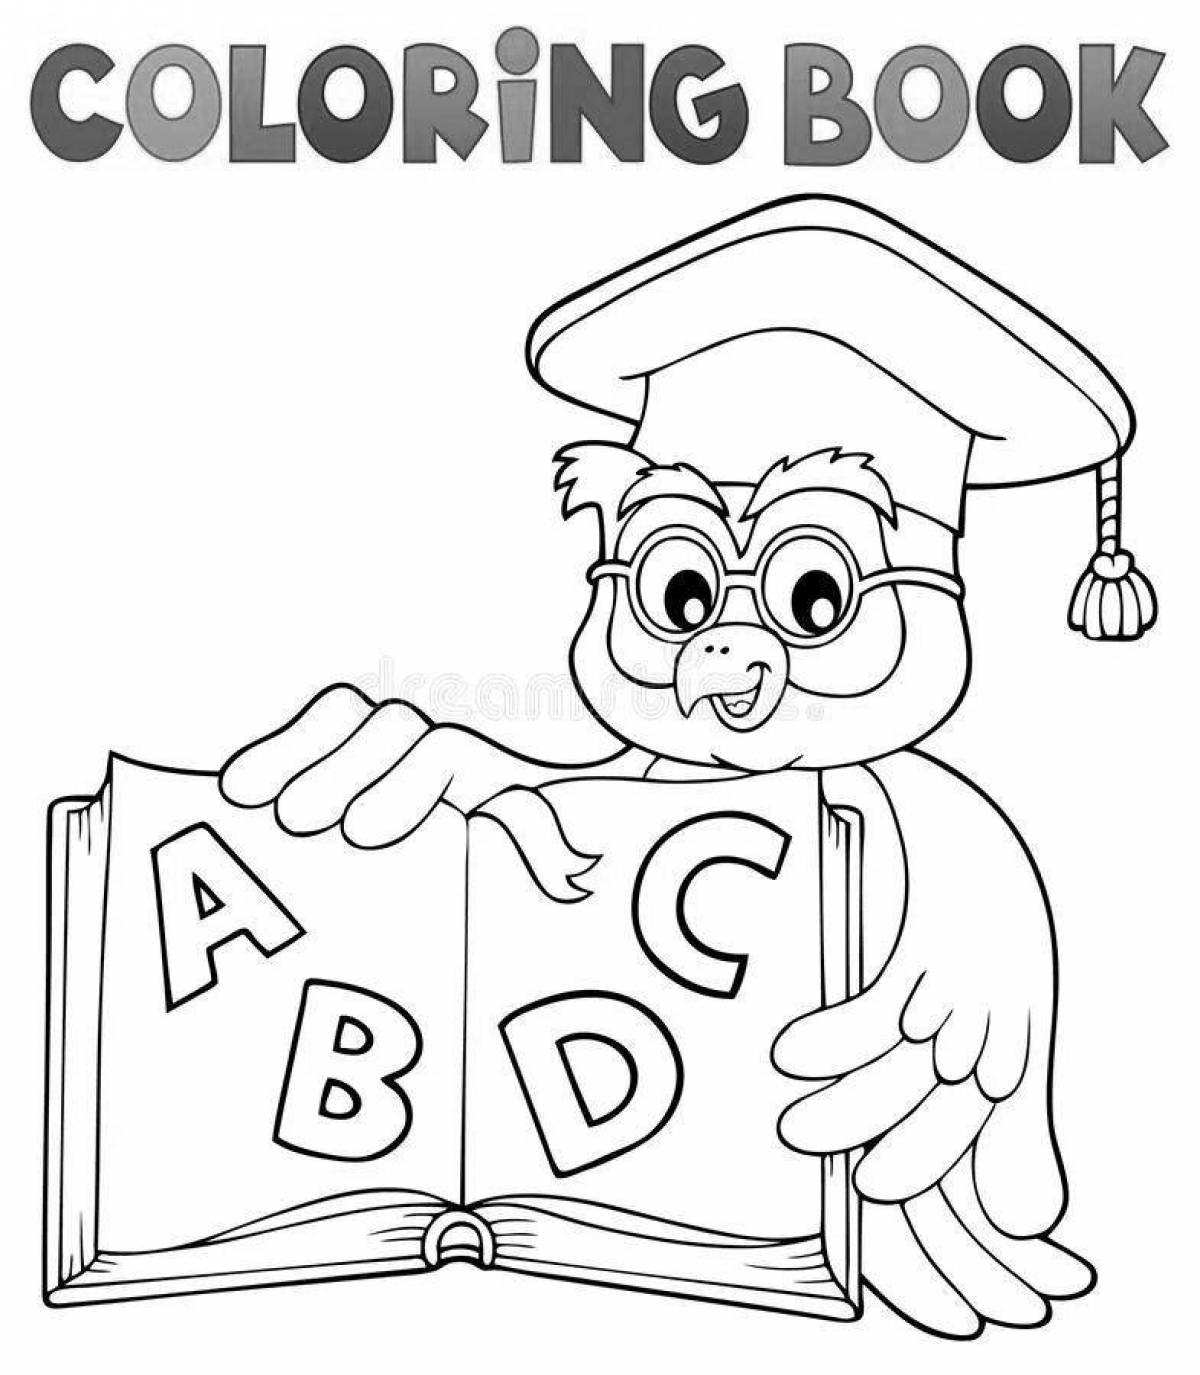 Coloring book wise owl with stack of books